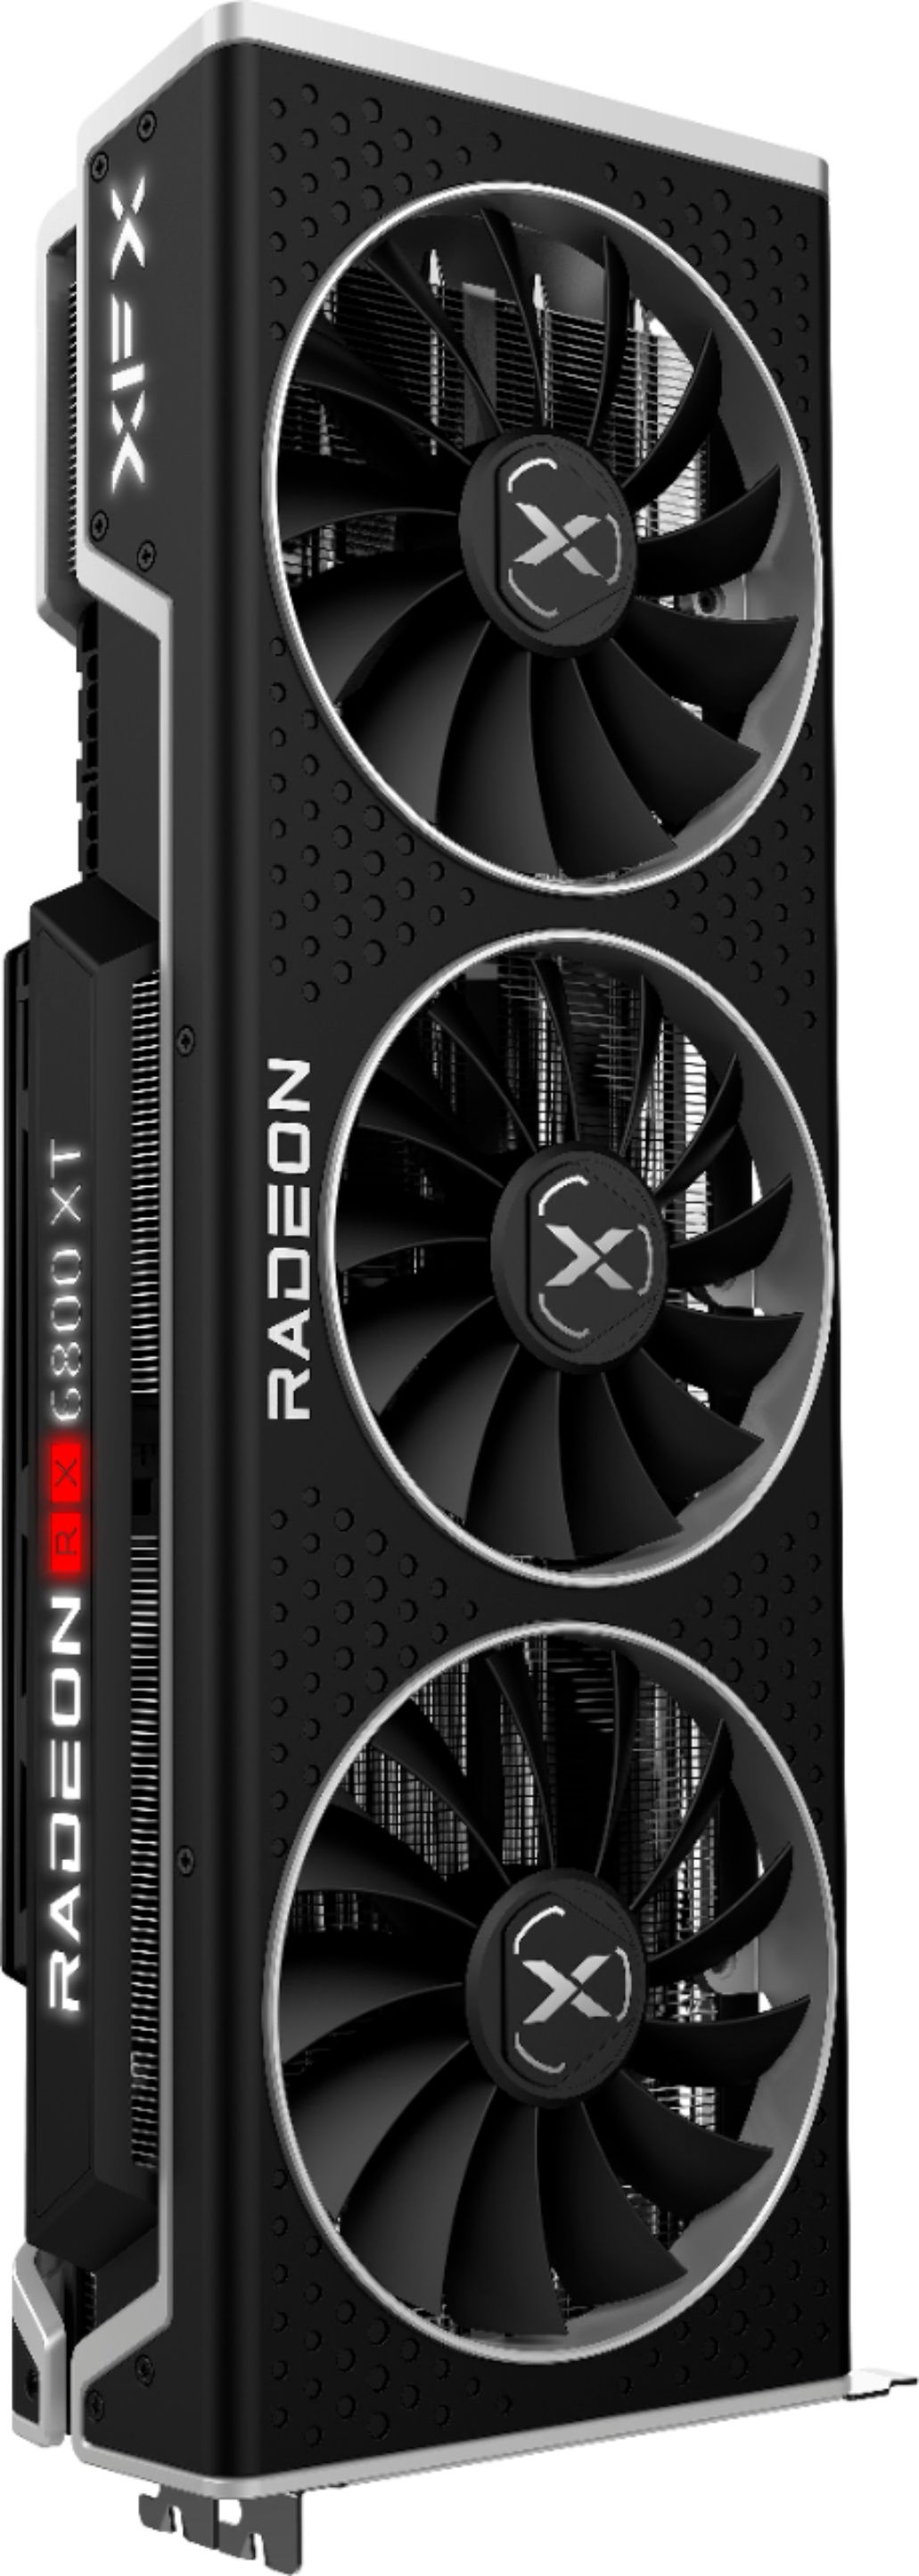 The XFX AMD Radeon RX 6800 XT GPU Is Down to $429.99 and Includes Starfield  - IGN